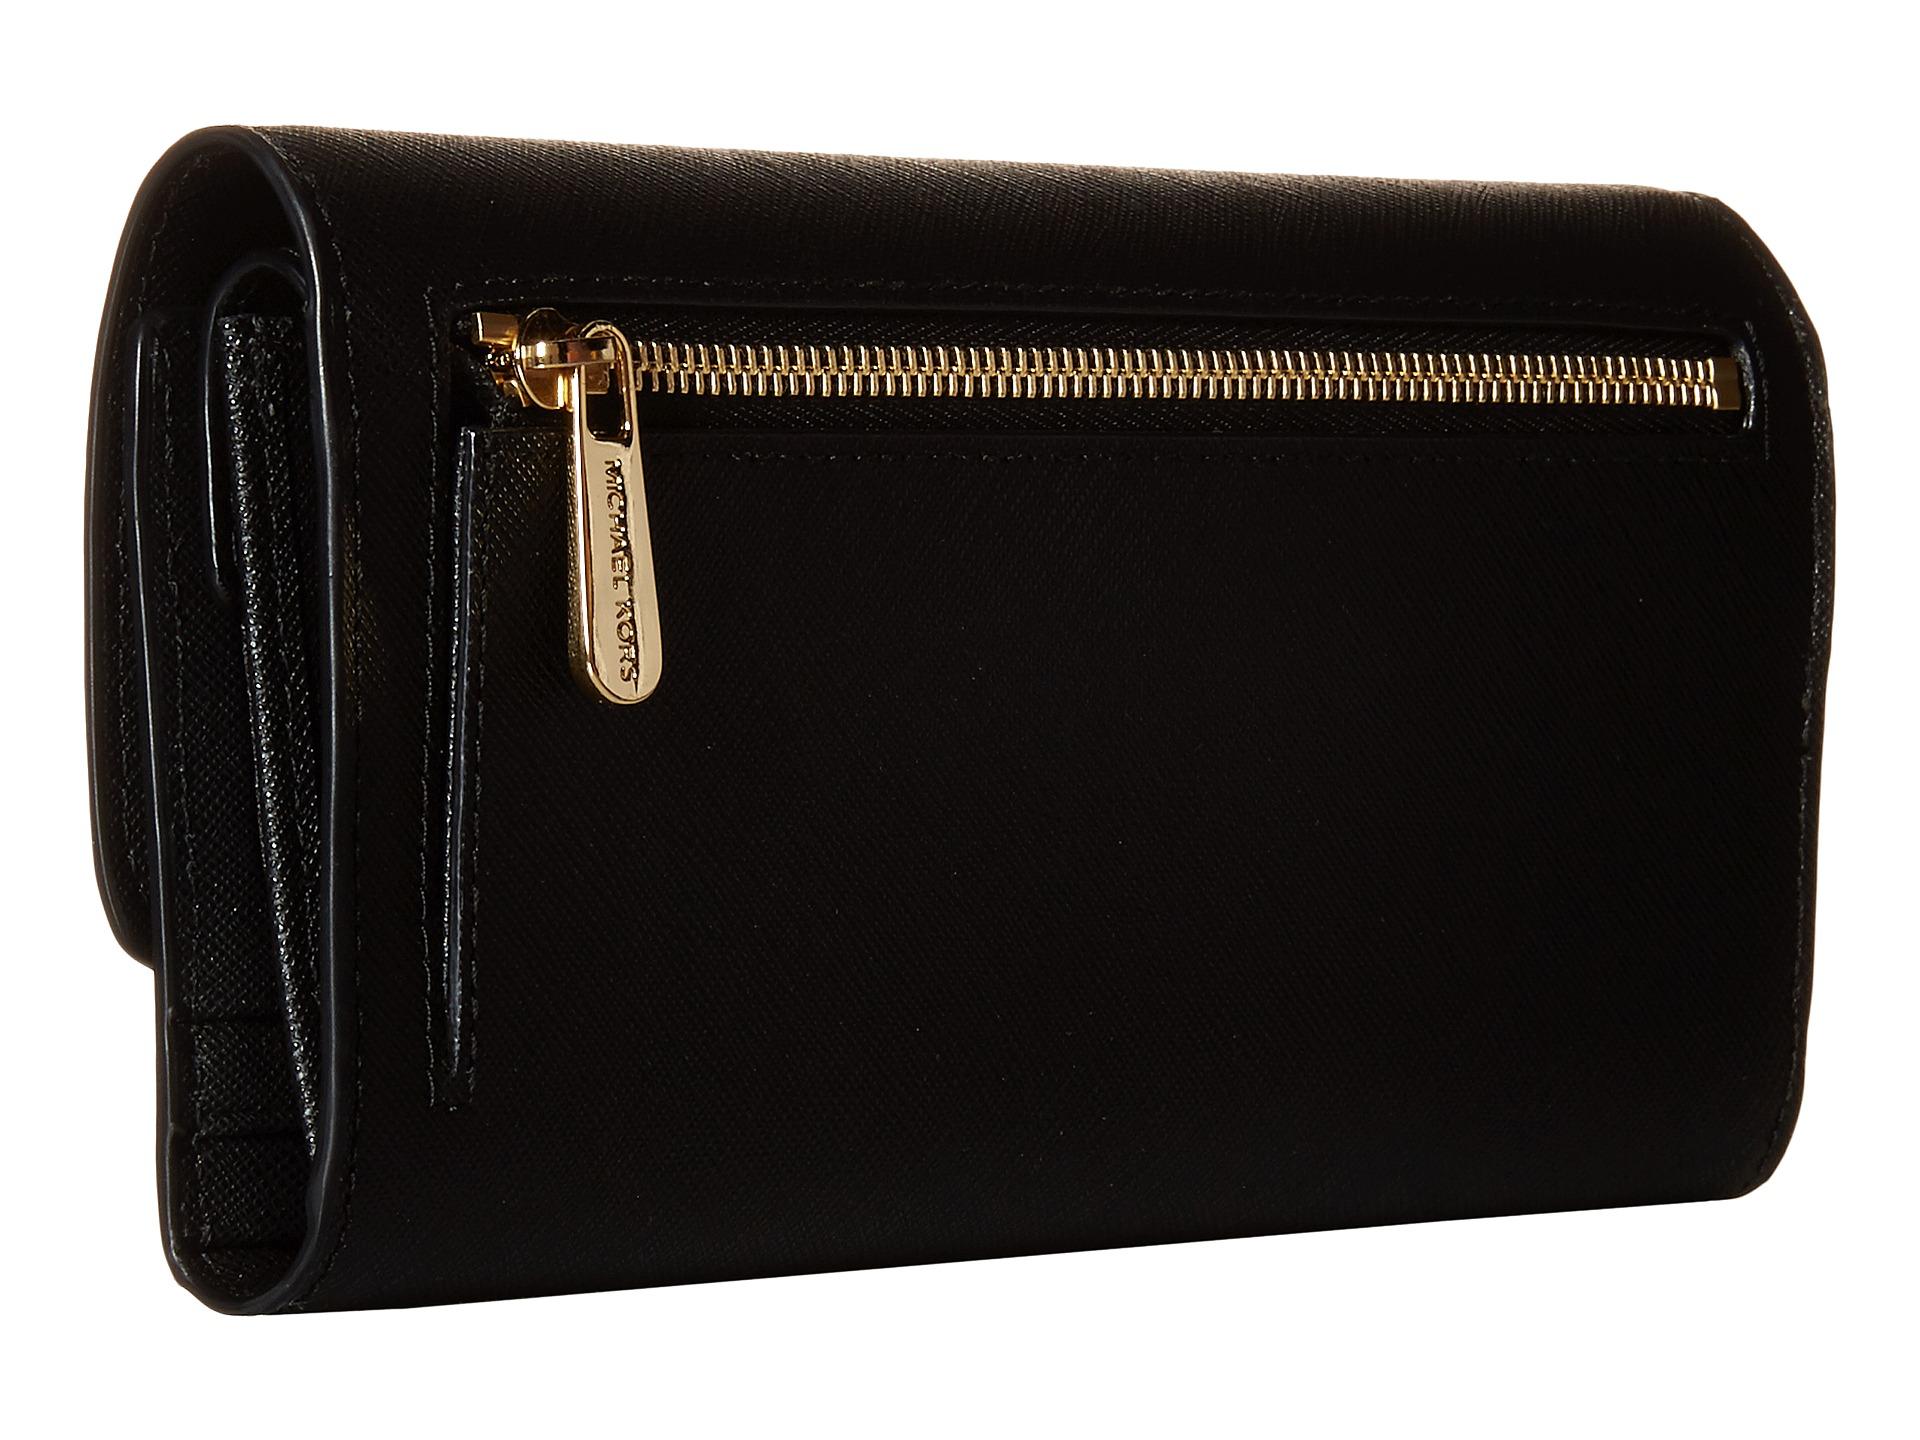 MICHAEL Michael Kors Ava Large Trifold Wallet in Black - Lyst